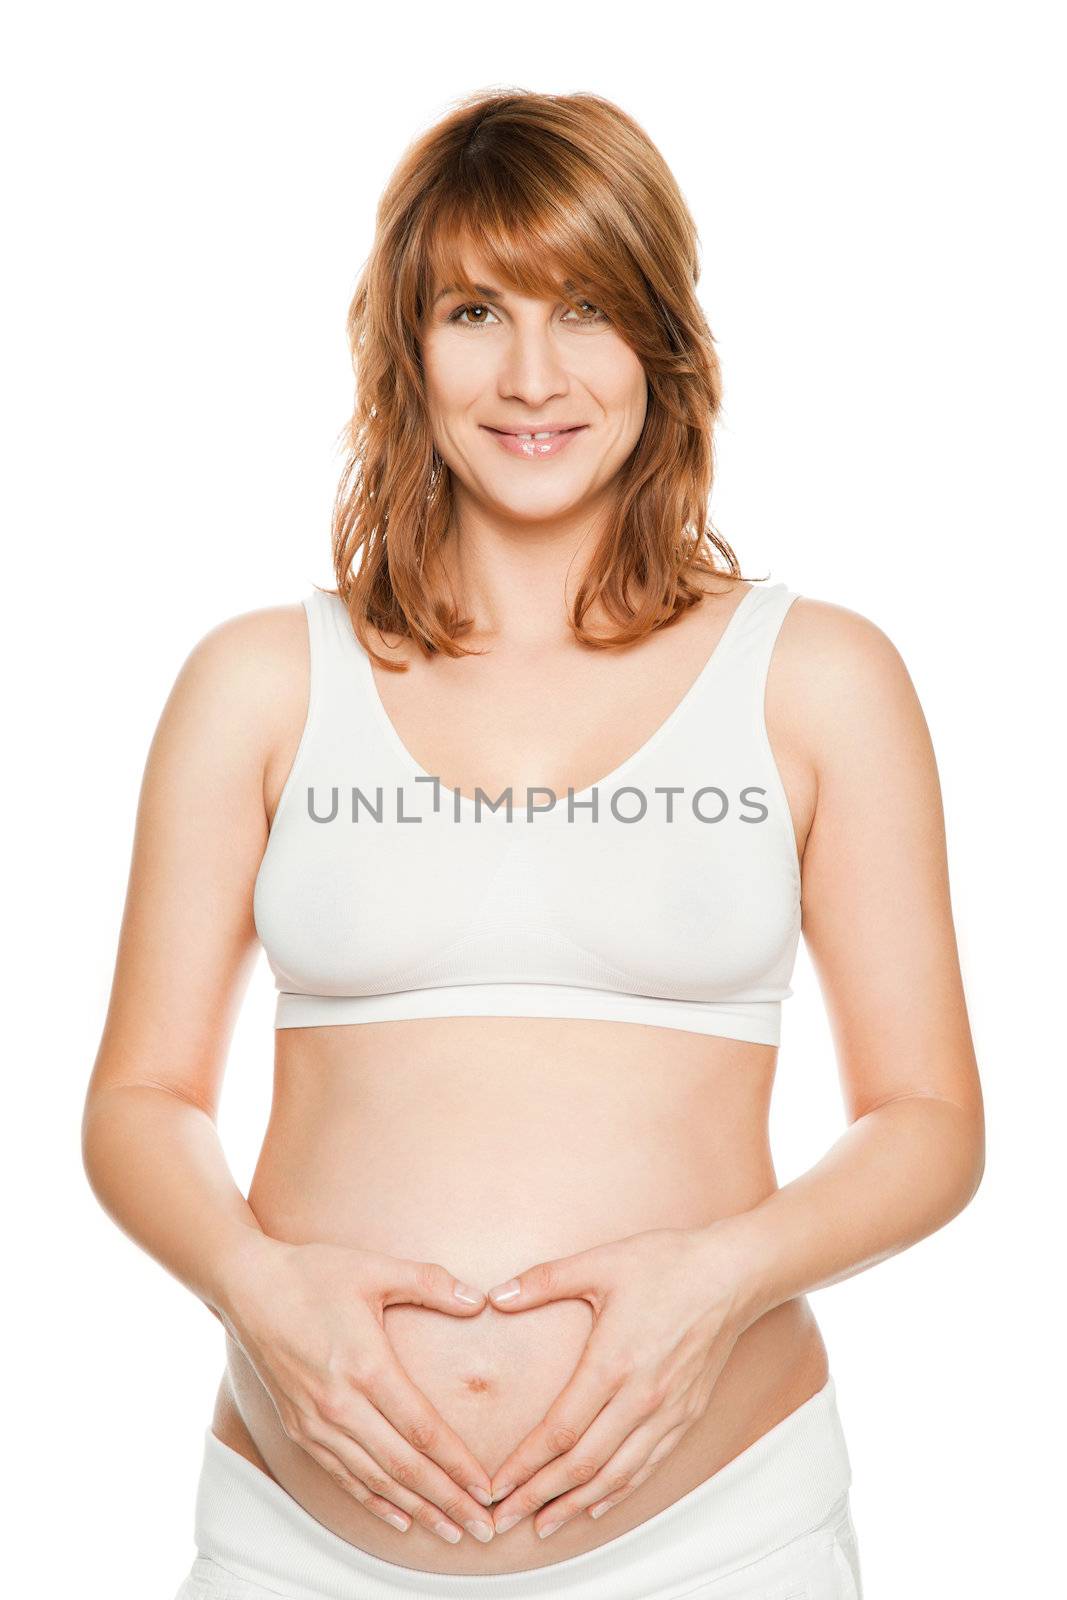 Smiling pregnat woman holding hands in heart sign on tummy